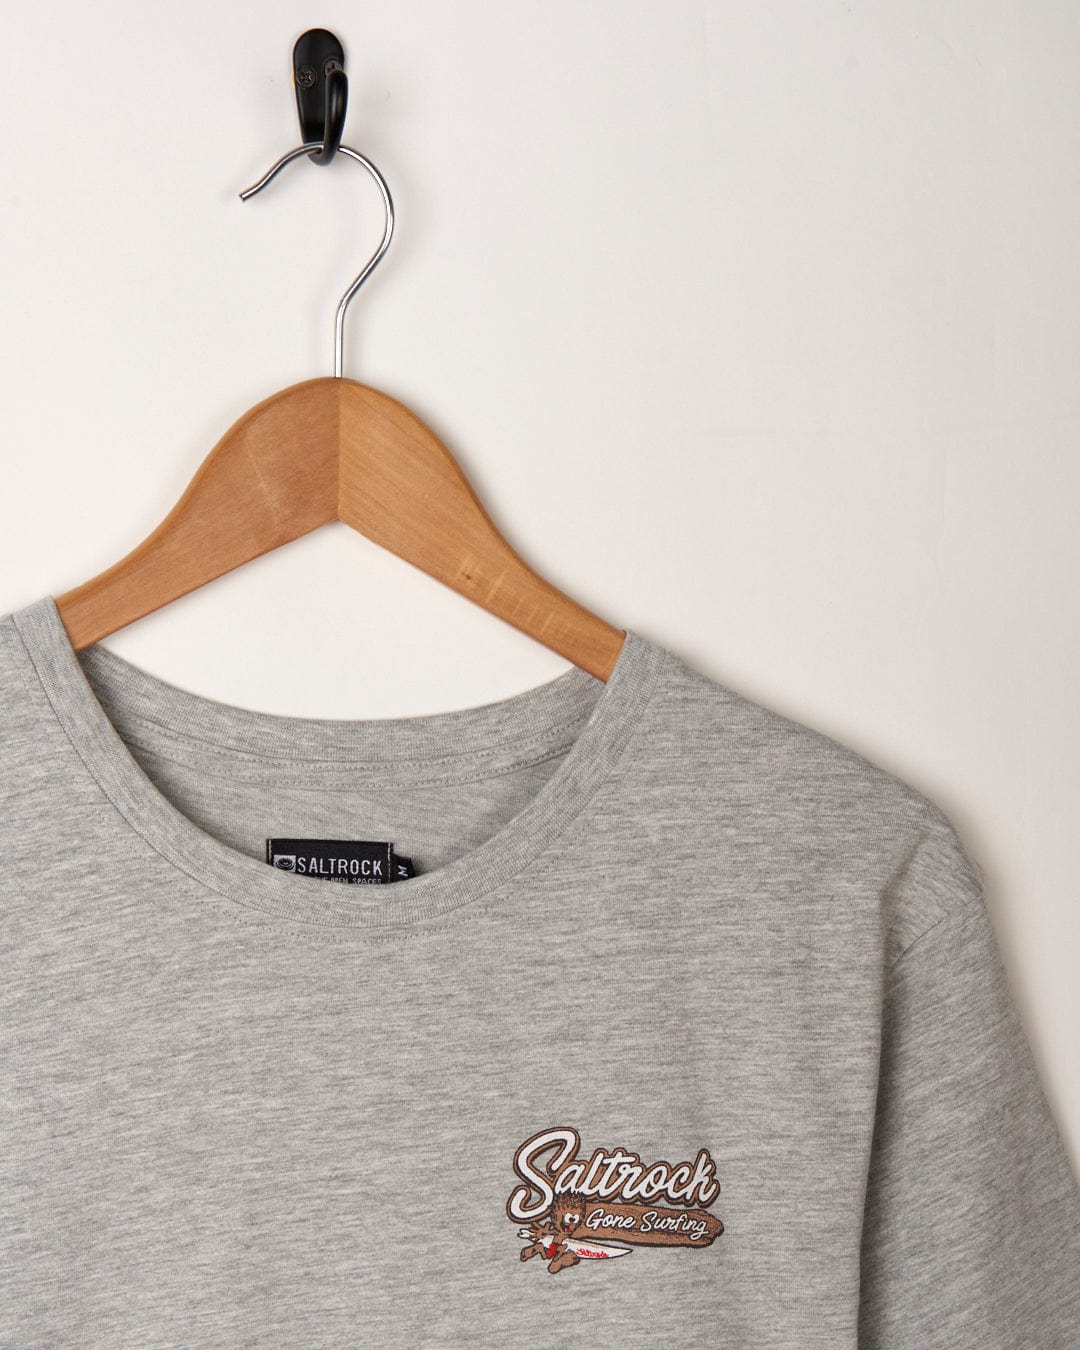 A grey Beach Signs Cornwall t-shirt featuring the iconic Saltrock branding in brown.